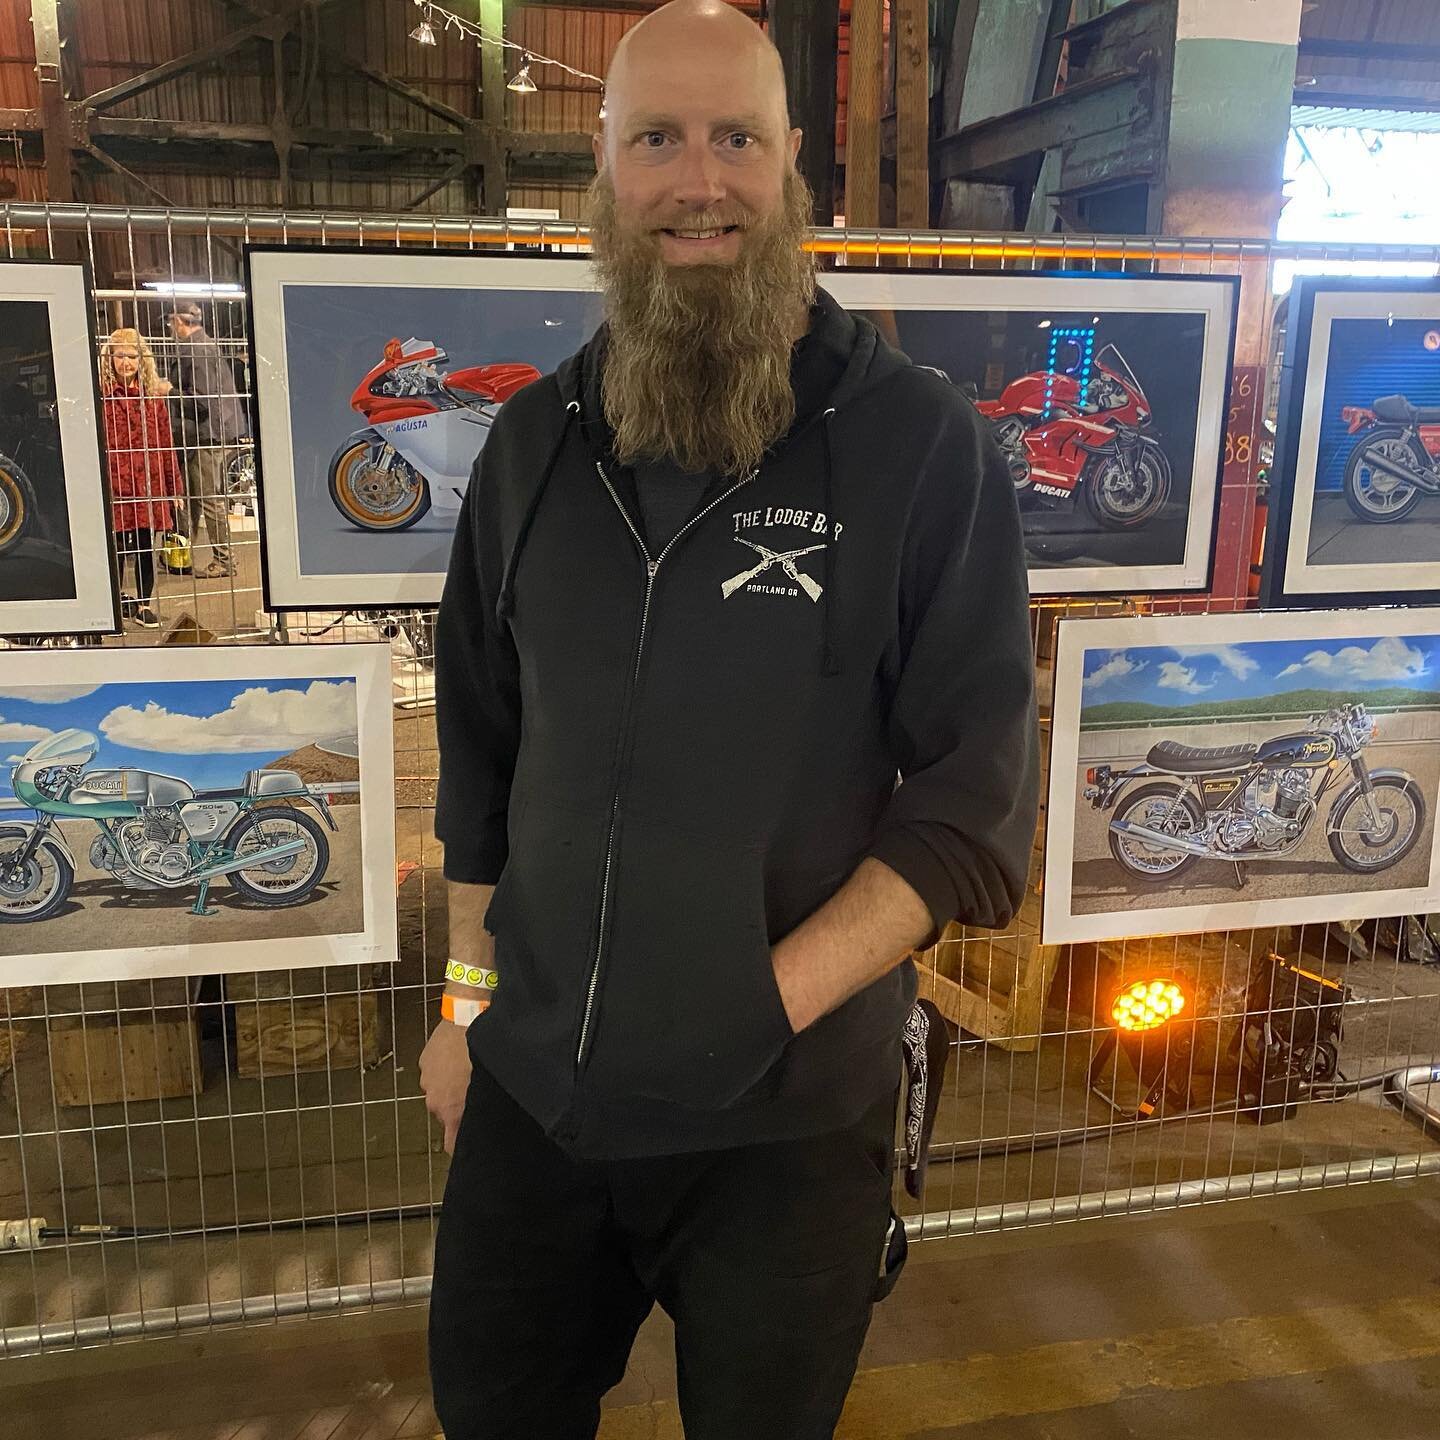 It was an absolute blast and a pleasure to see and represent some of the super talented artists last weekend at the @the1moto show. Especially @alexreisfar and @tedgadeckiart as well as find new artists like @bunkyart  such a fun event to attend! #mo